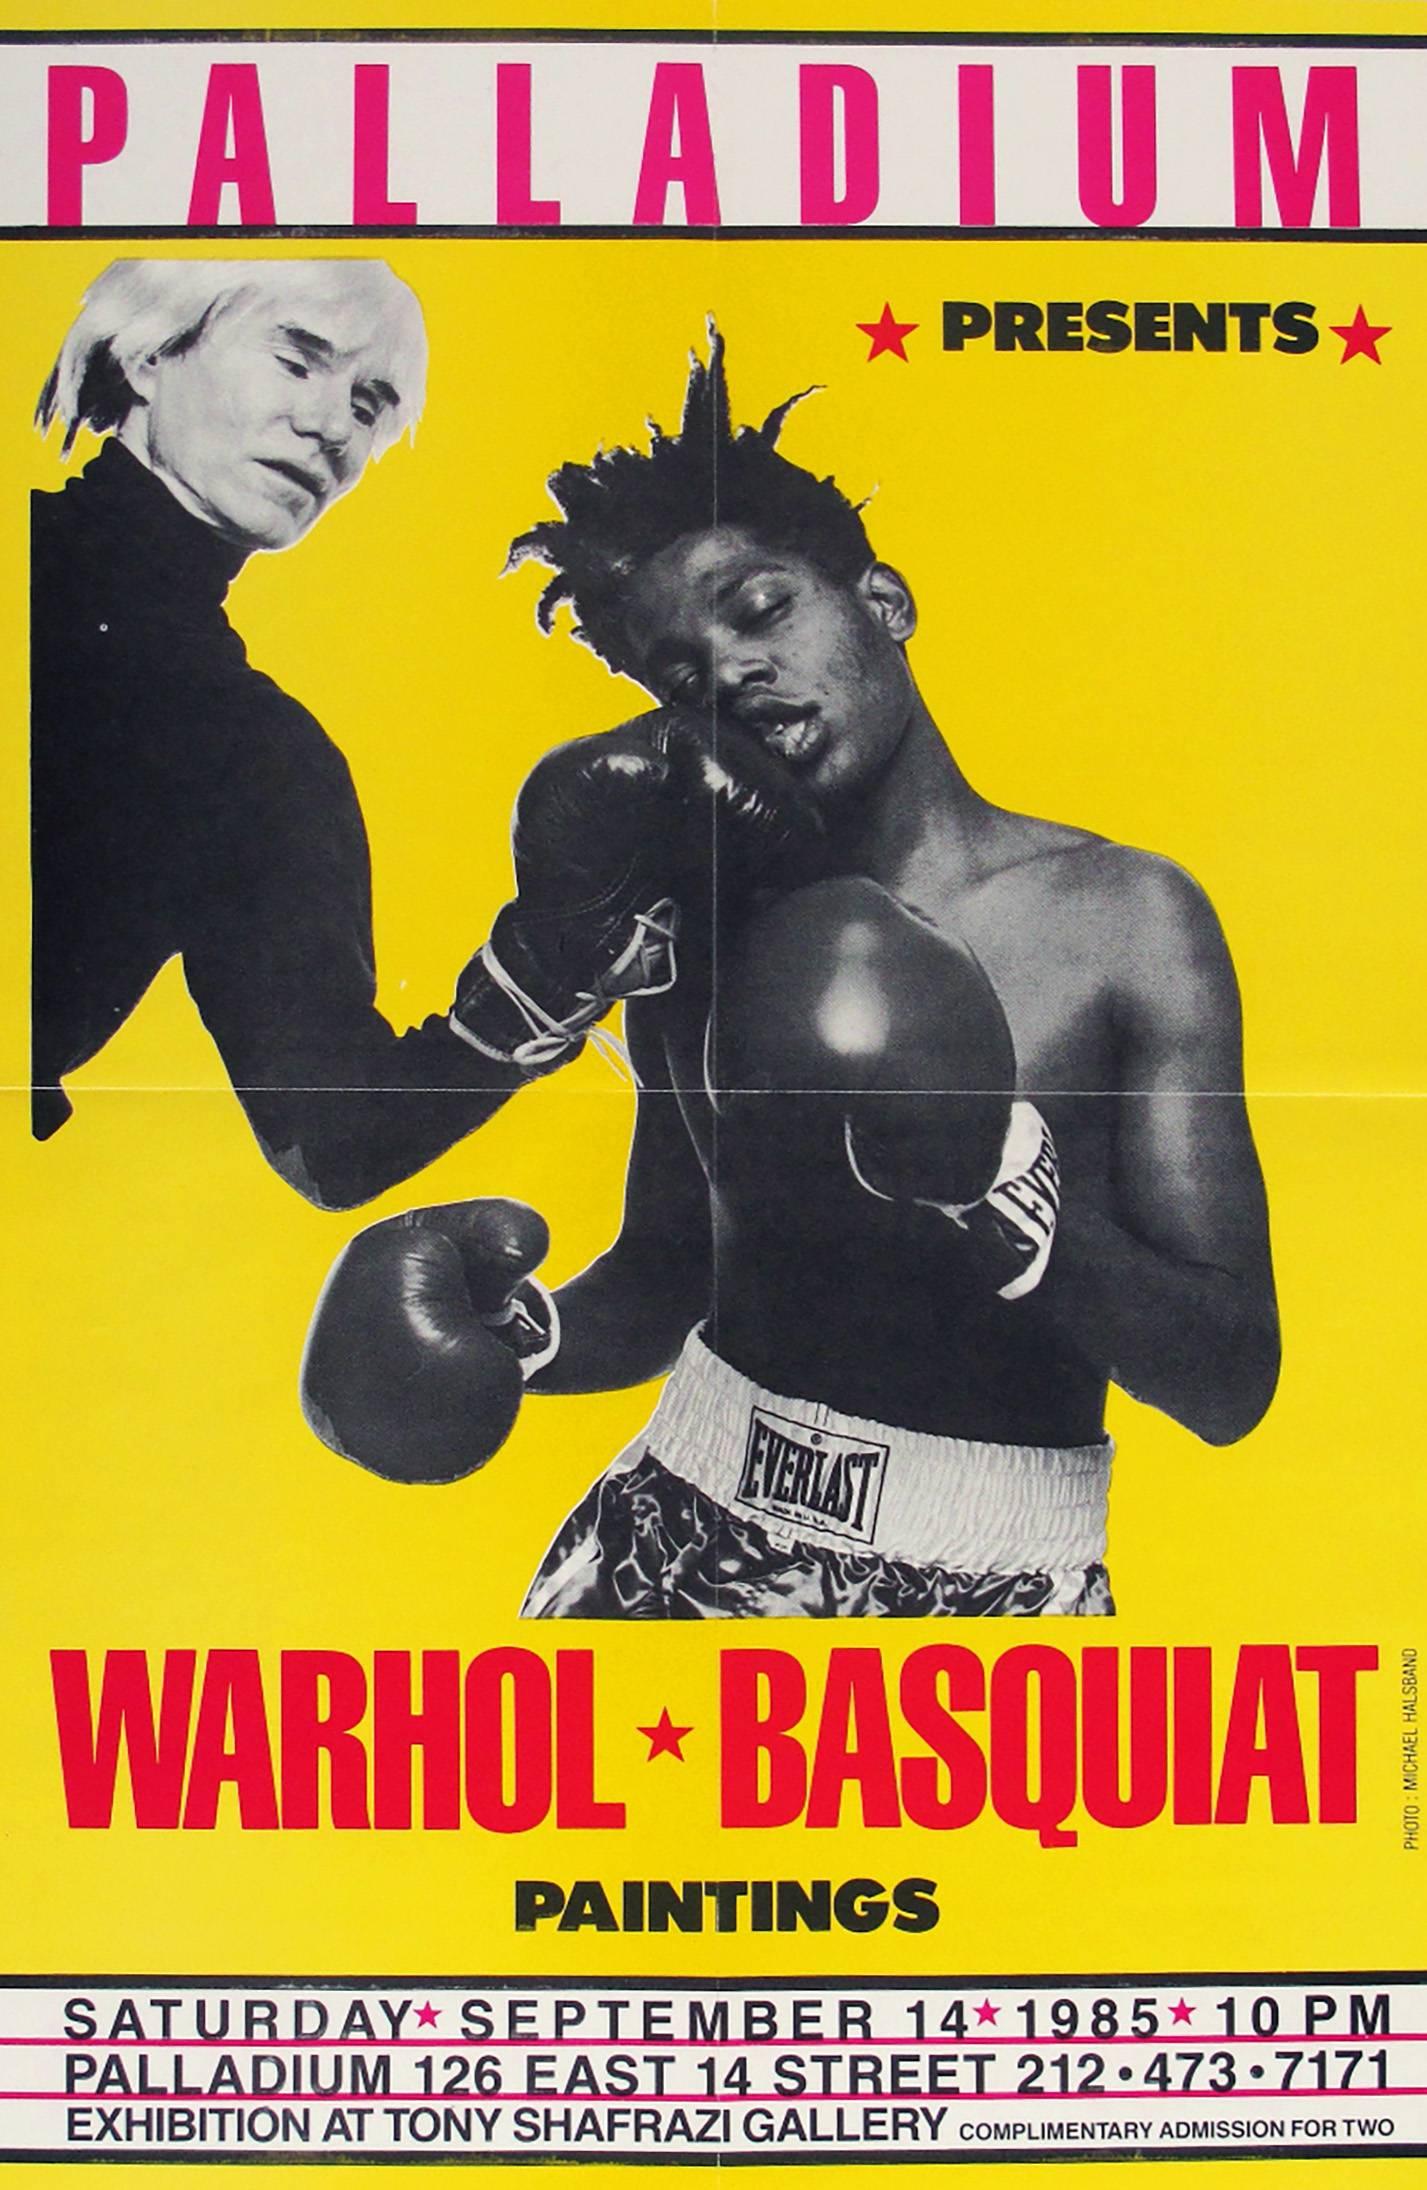 Jean-Michel Basquiat & Andy Warhol 'Paintings' Exhibit Poster - Print by Michael Halsband